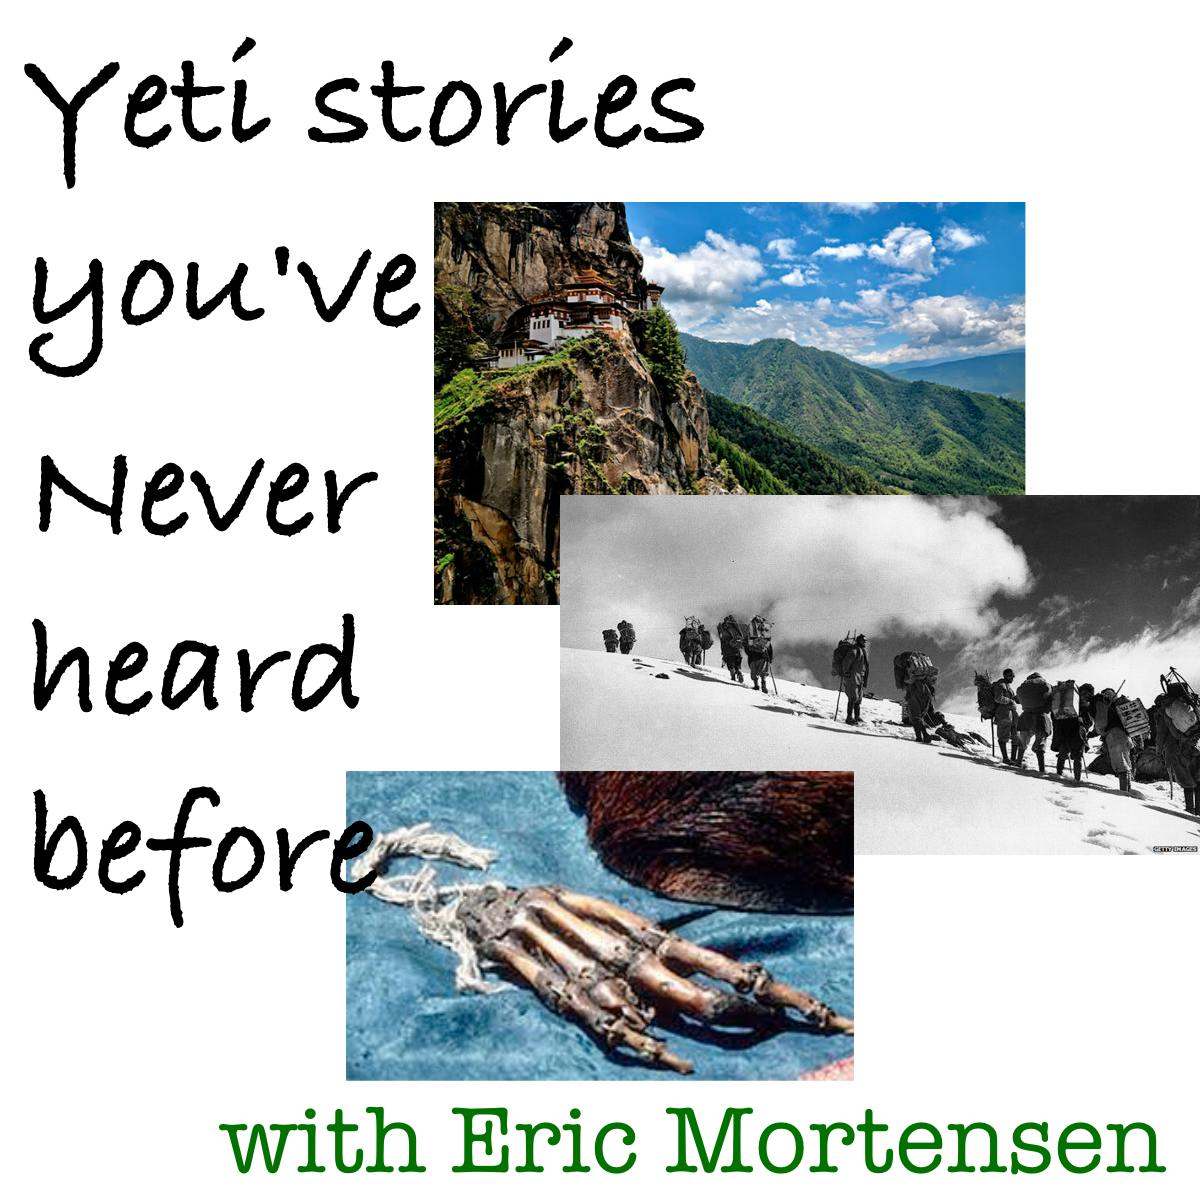 253 - Yeti Stories You’ve Never Heard Before - with Eric Mortensen